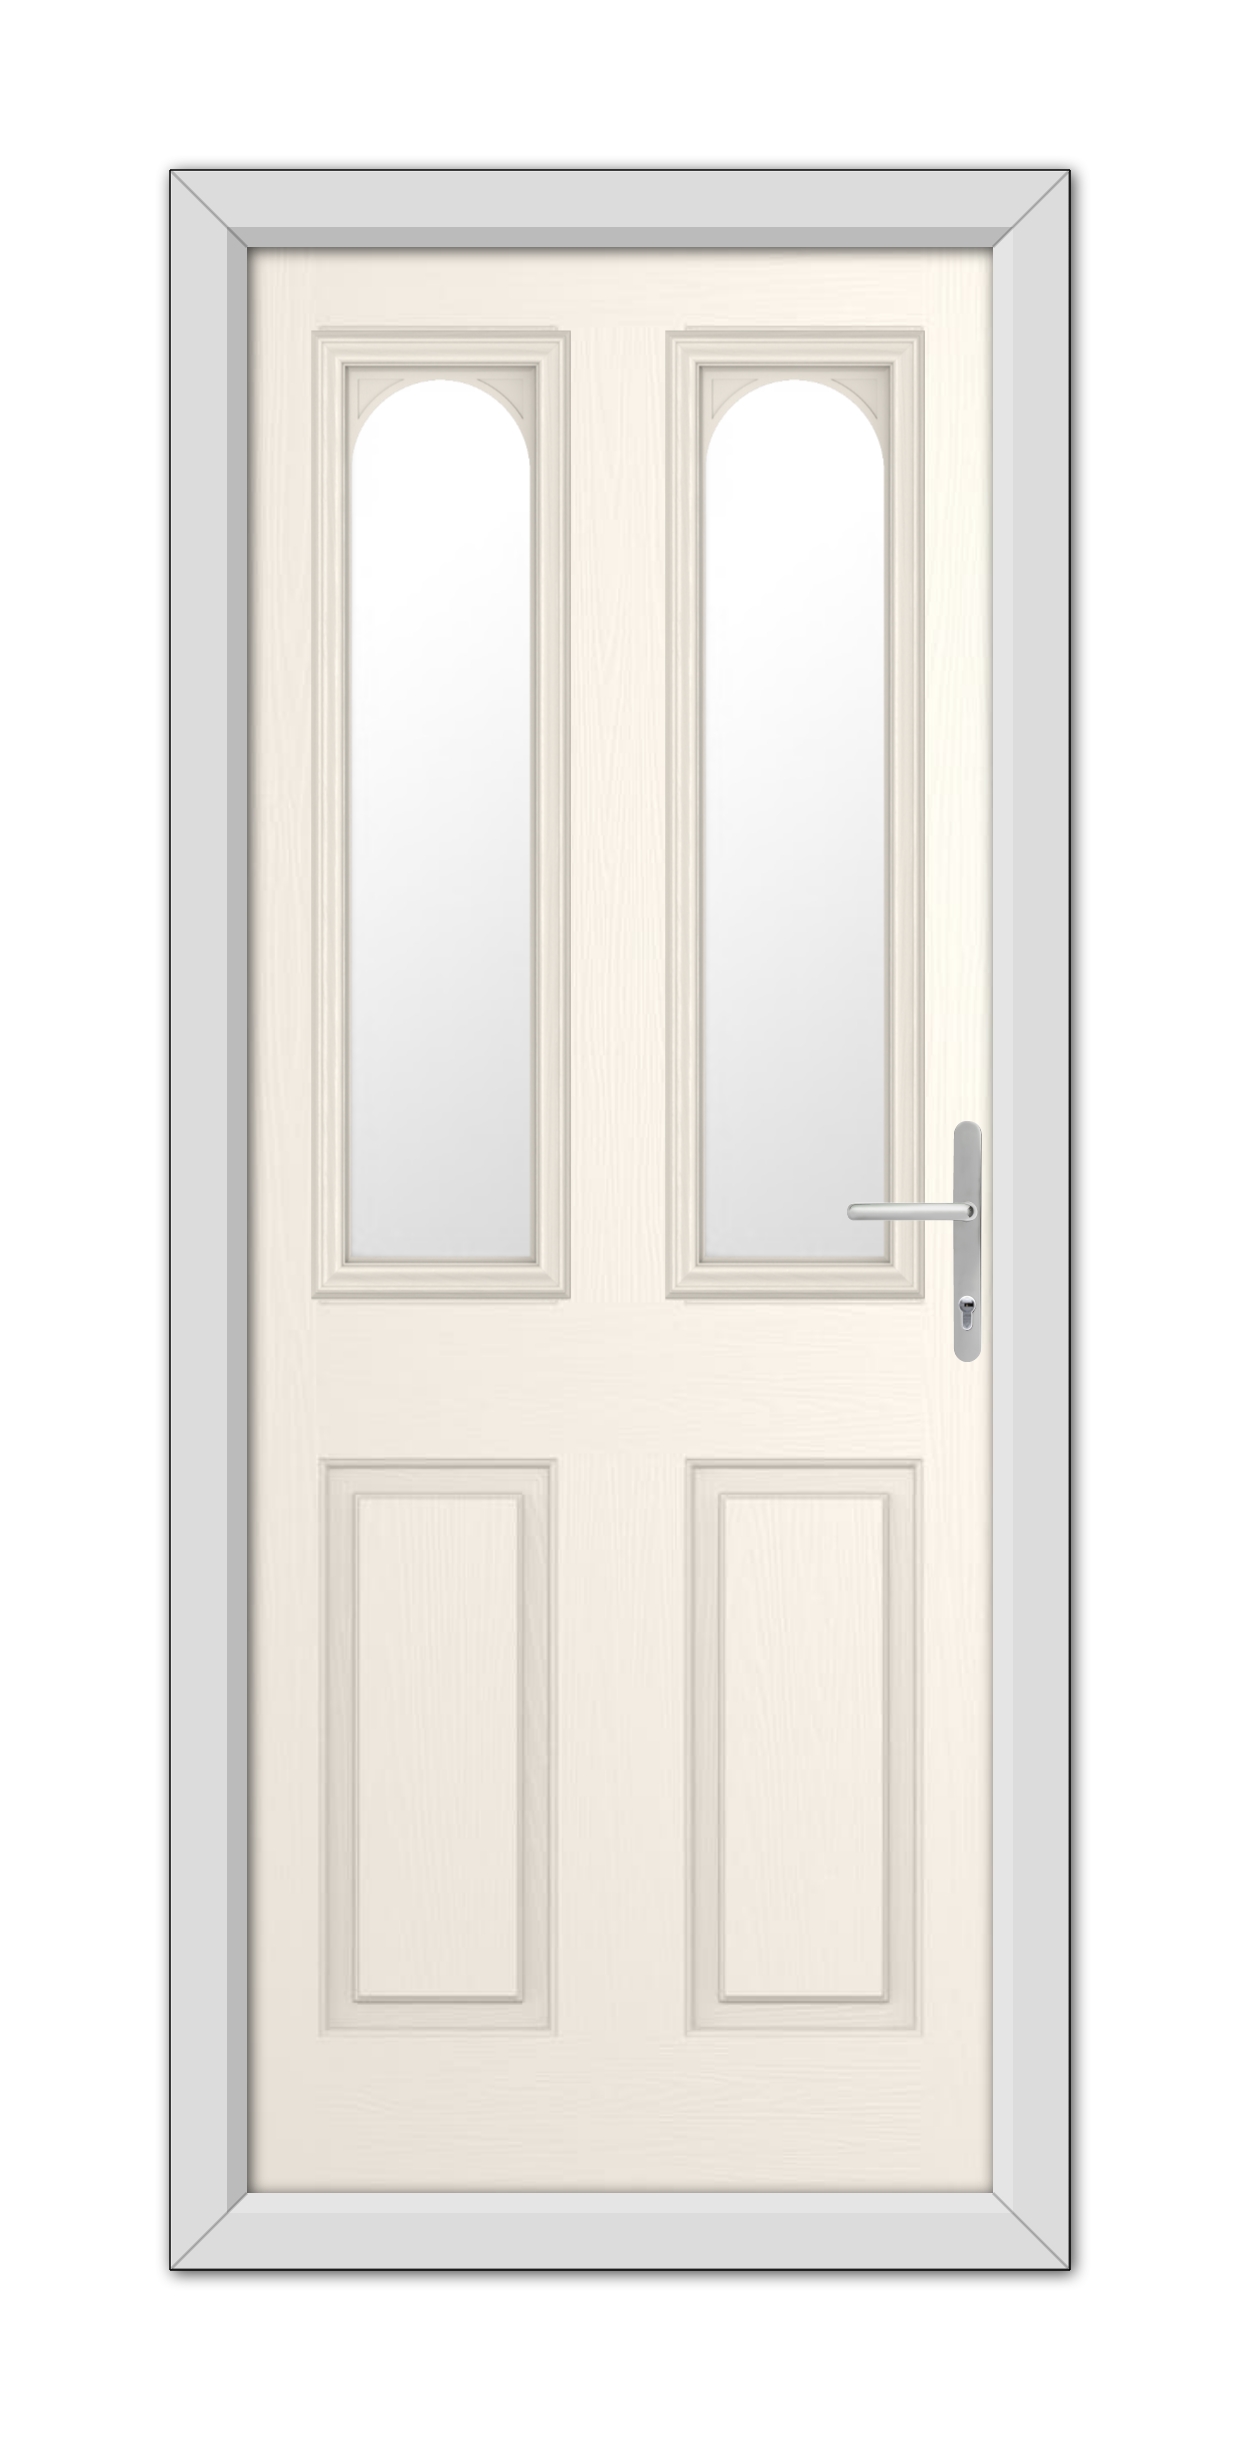 A modern, White Foil Elmhurst Composite Door 48mm Timber Core with two vertical glass panels and a metallic handle, set within a simple frame.